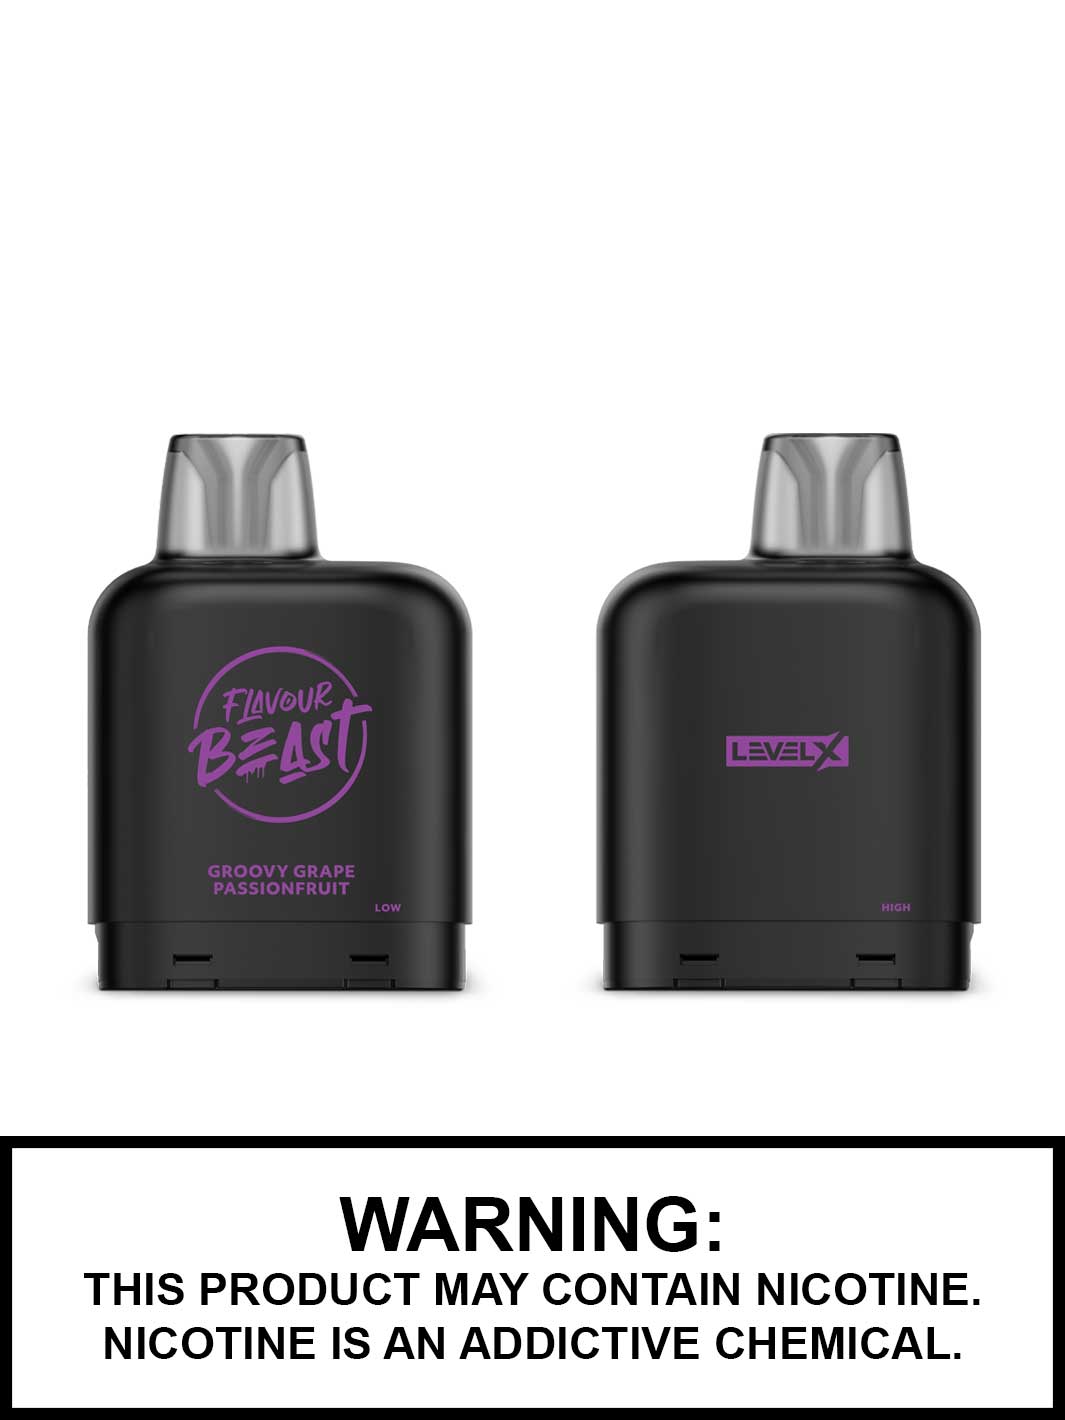 Groovy Grape Passionfruit Iced Level X Flavour Beast Pods, Vape360 Canada